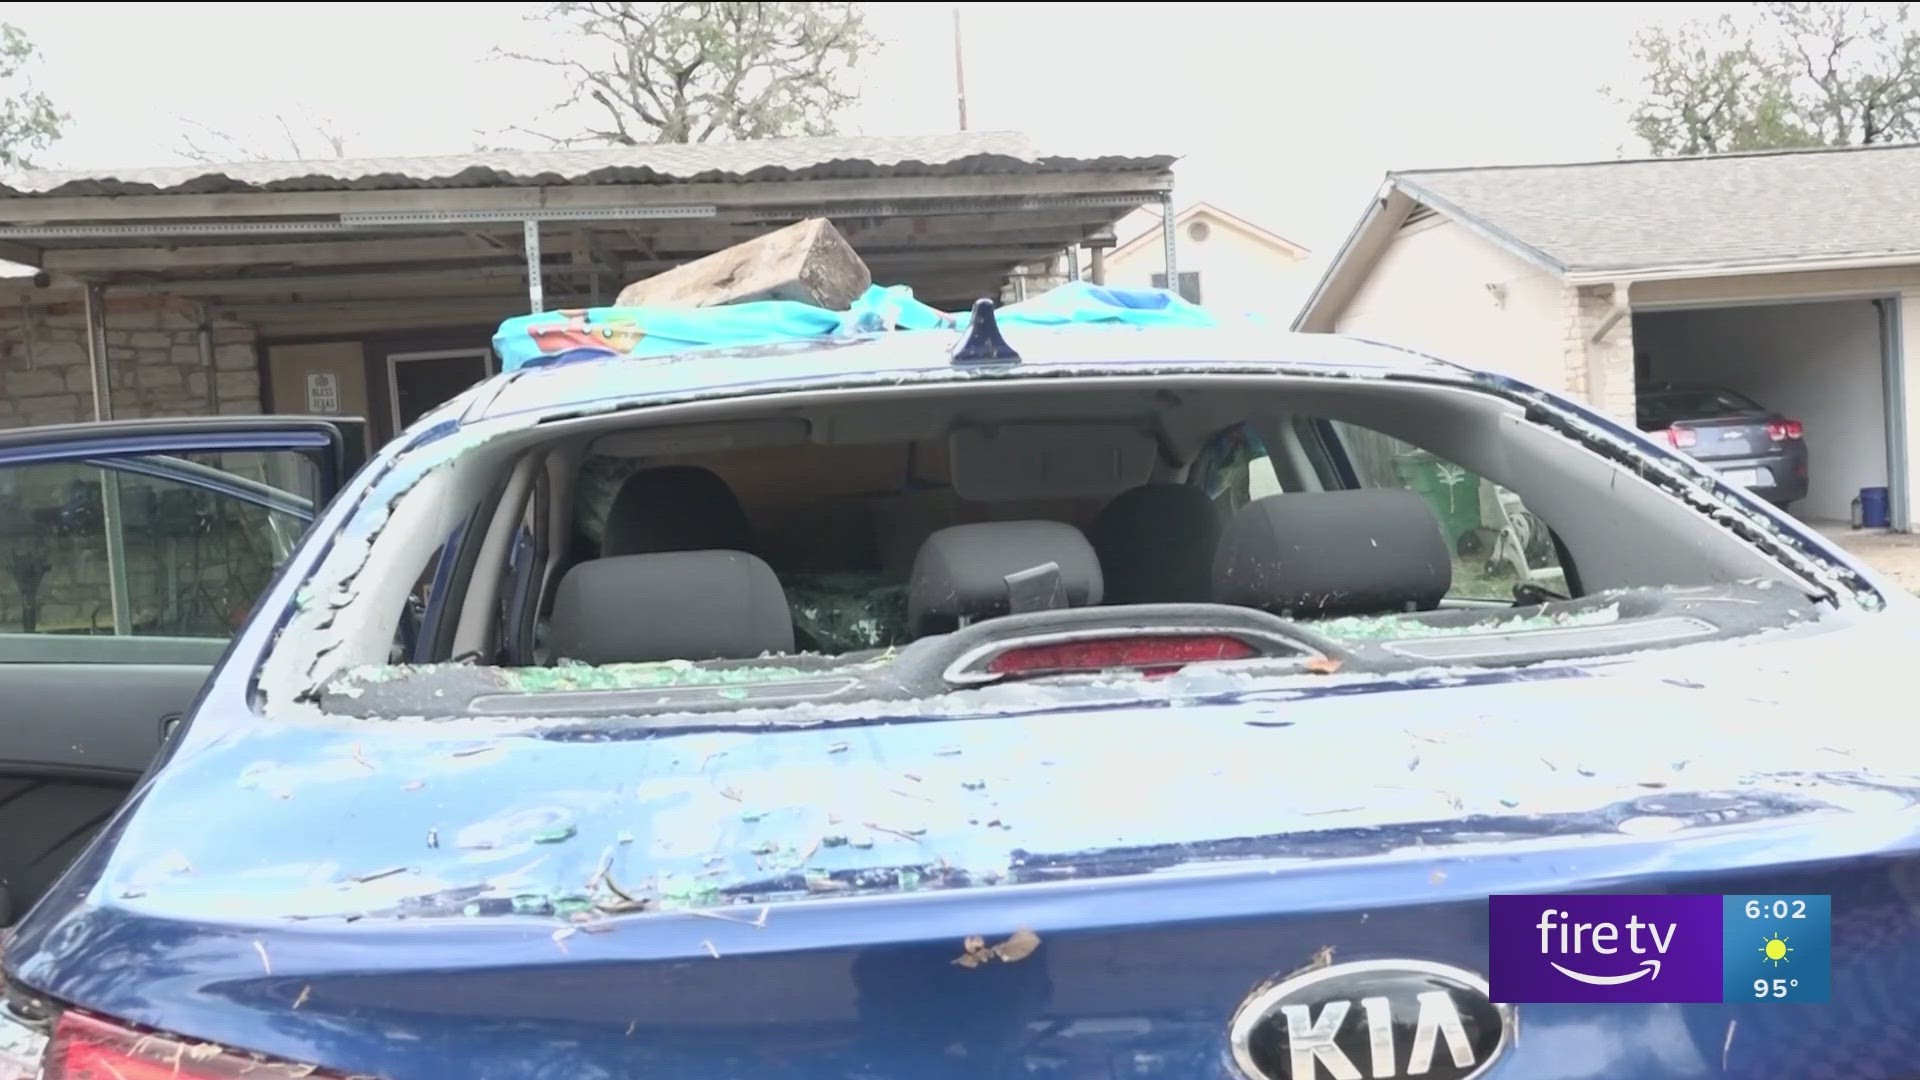 Strong storms brought hail to parts of Central Texas on Sunday night, causing thousands of dollars in damage to cars and homes.